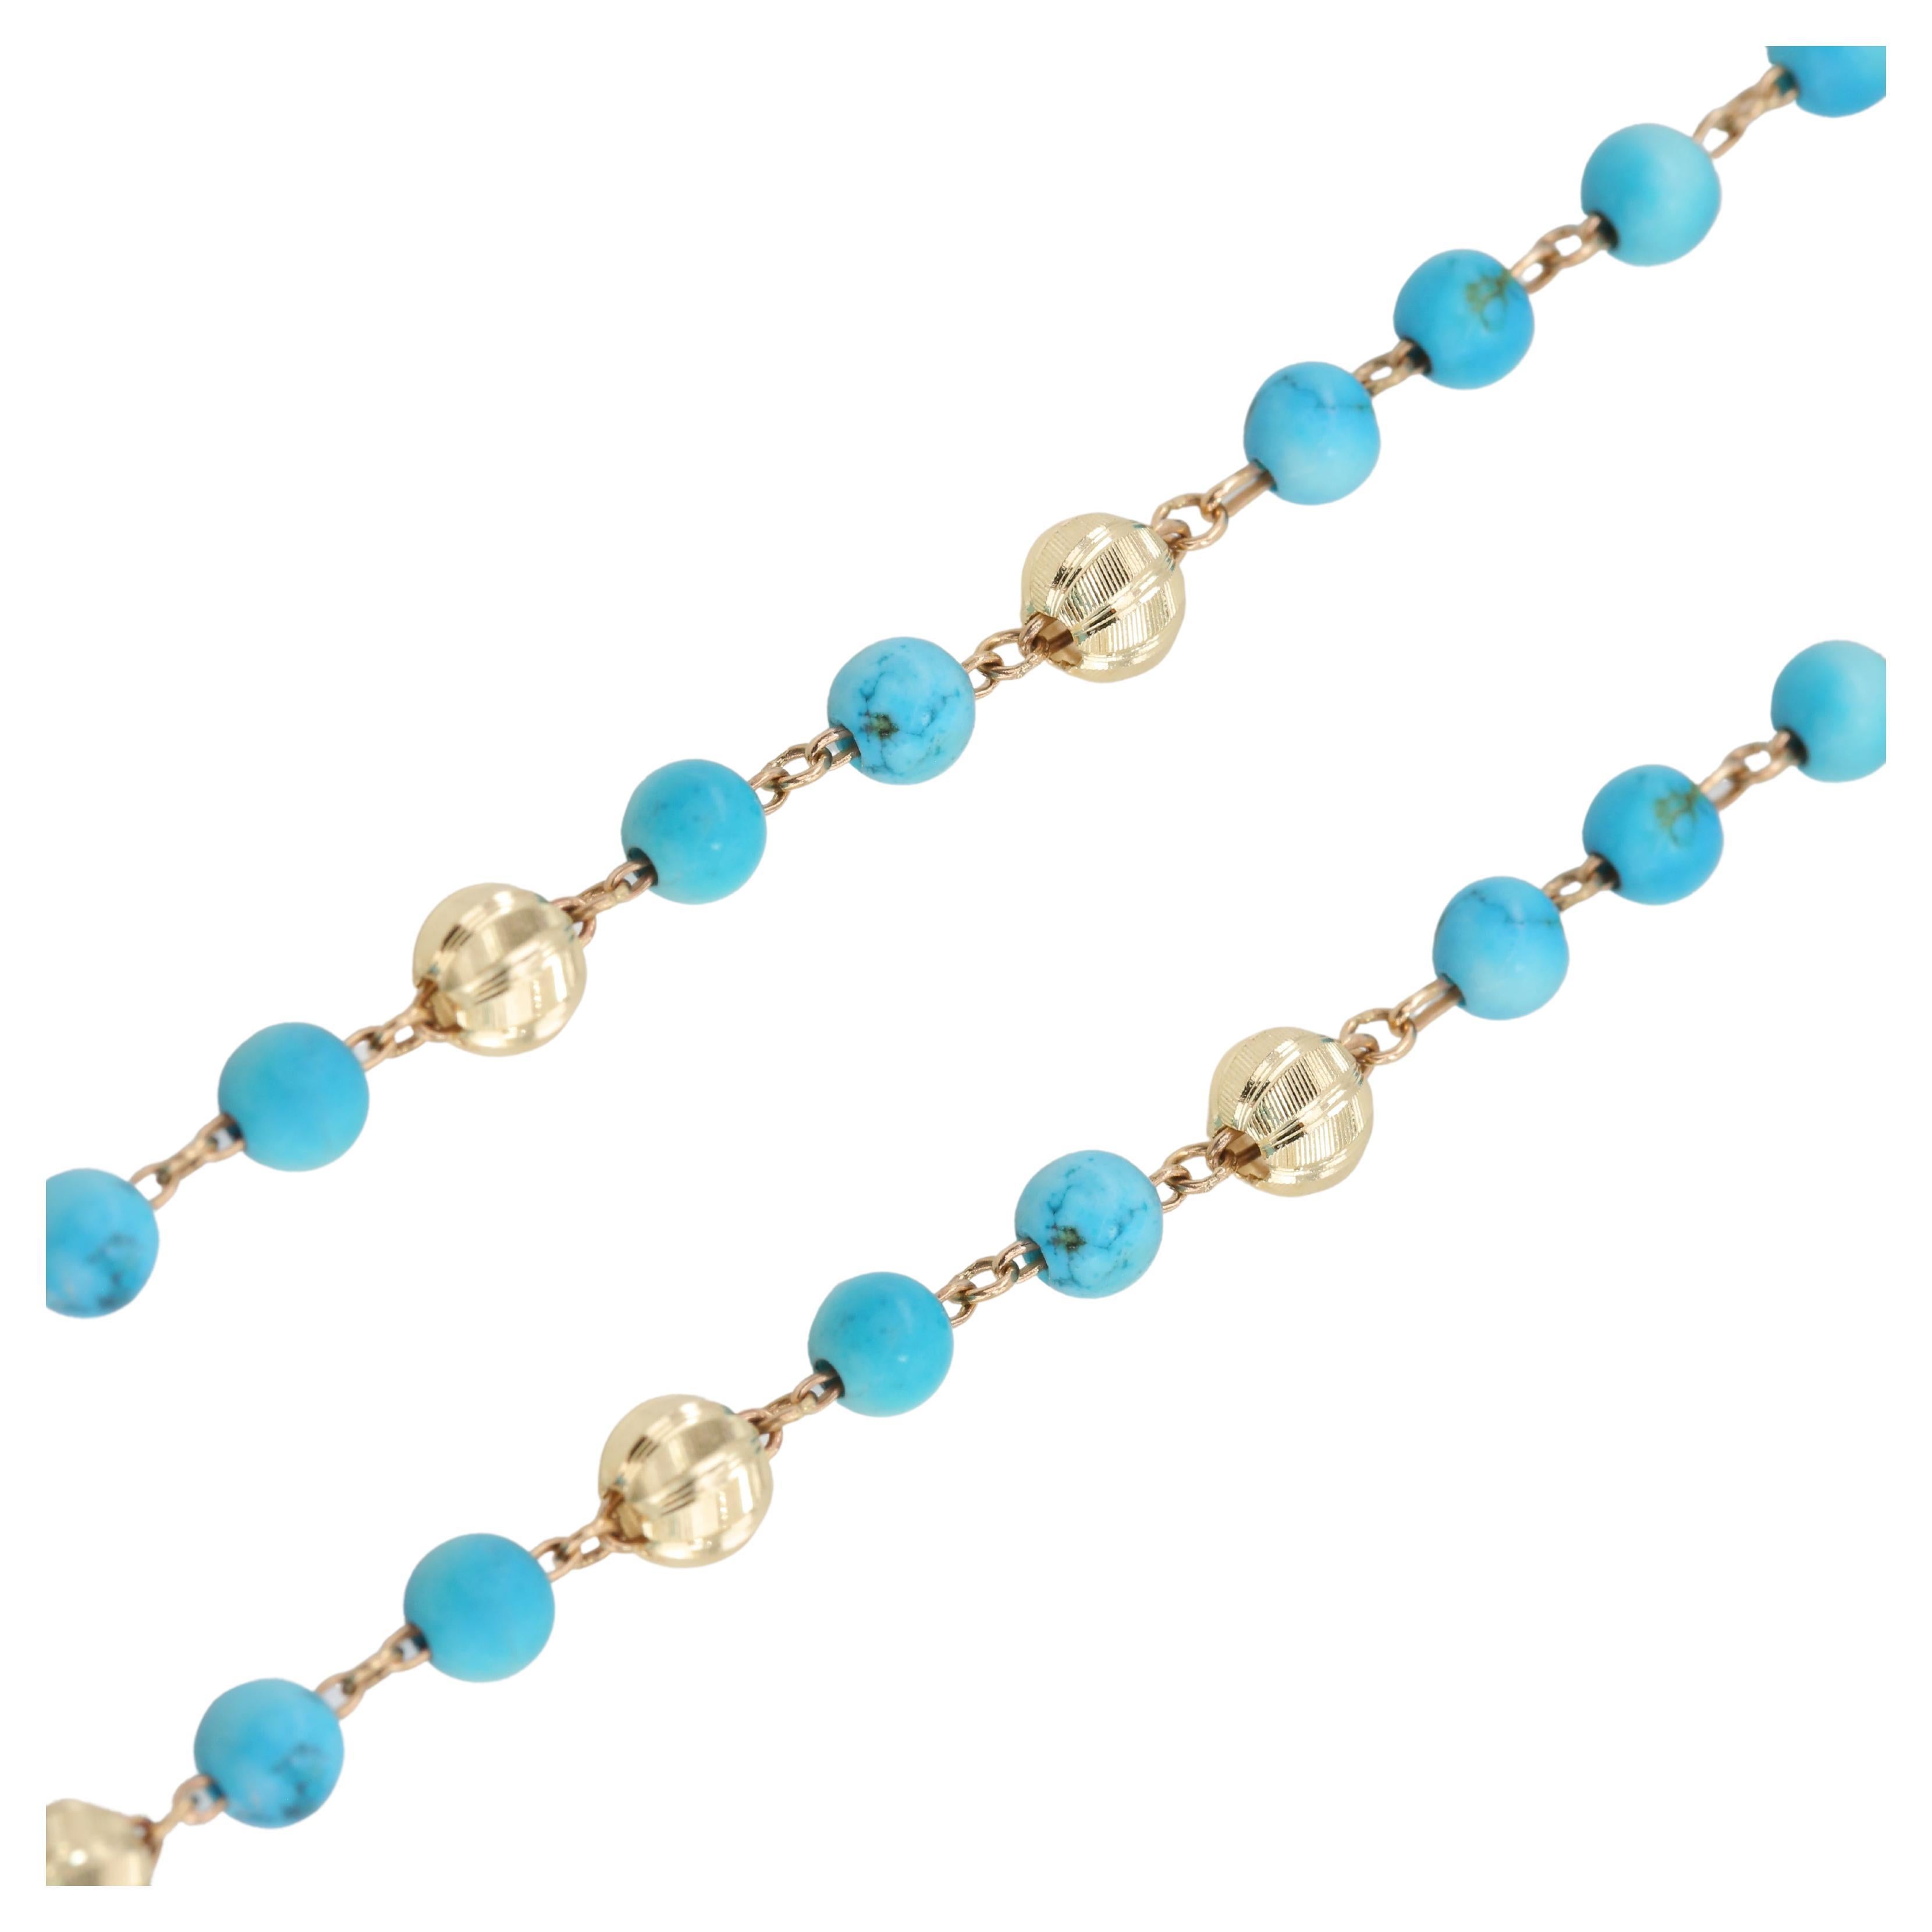 14K Gold Bracelet with Turquoise, 14k Gold Turquois Bracelet, Turquoise Bracelet